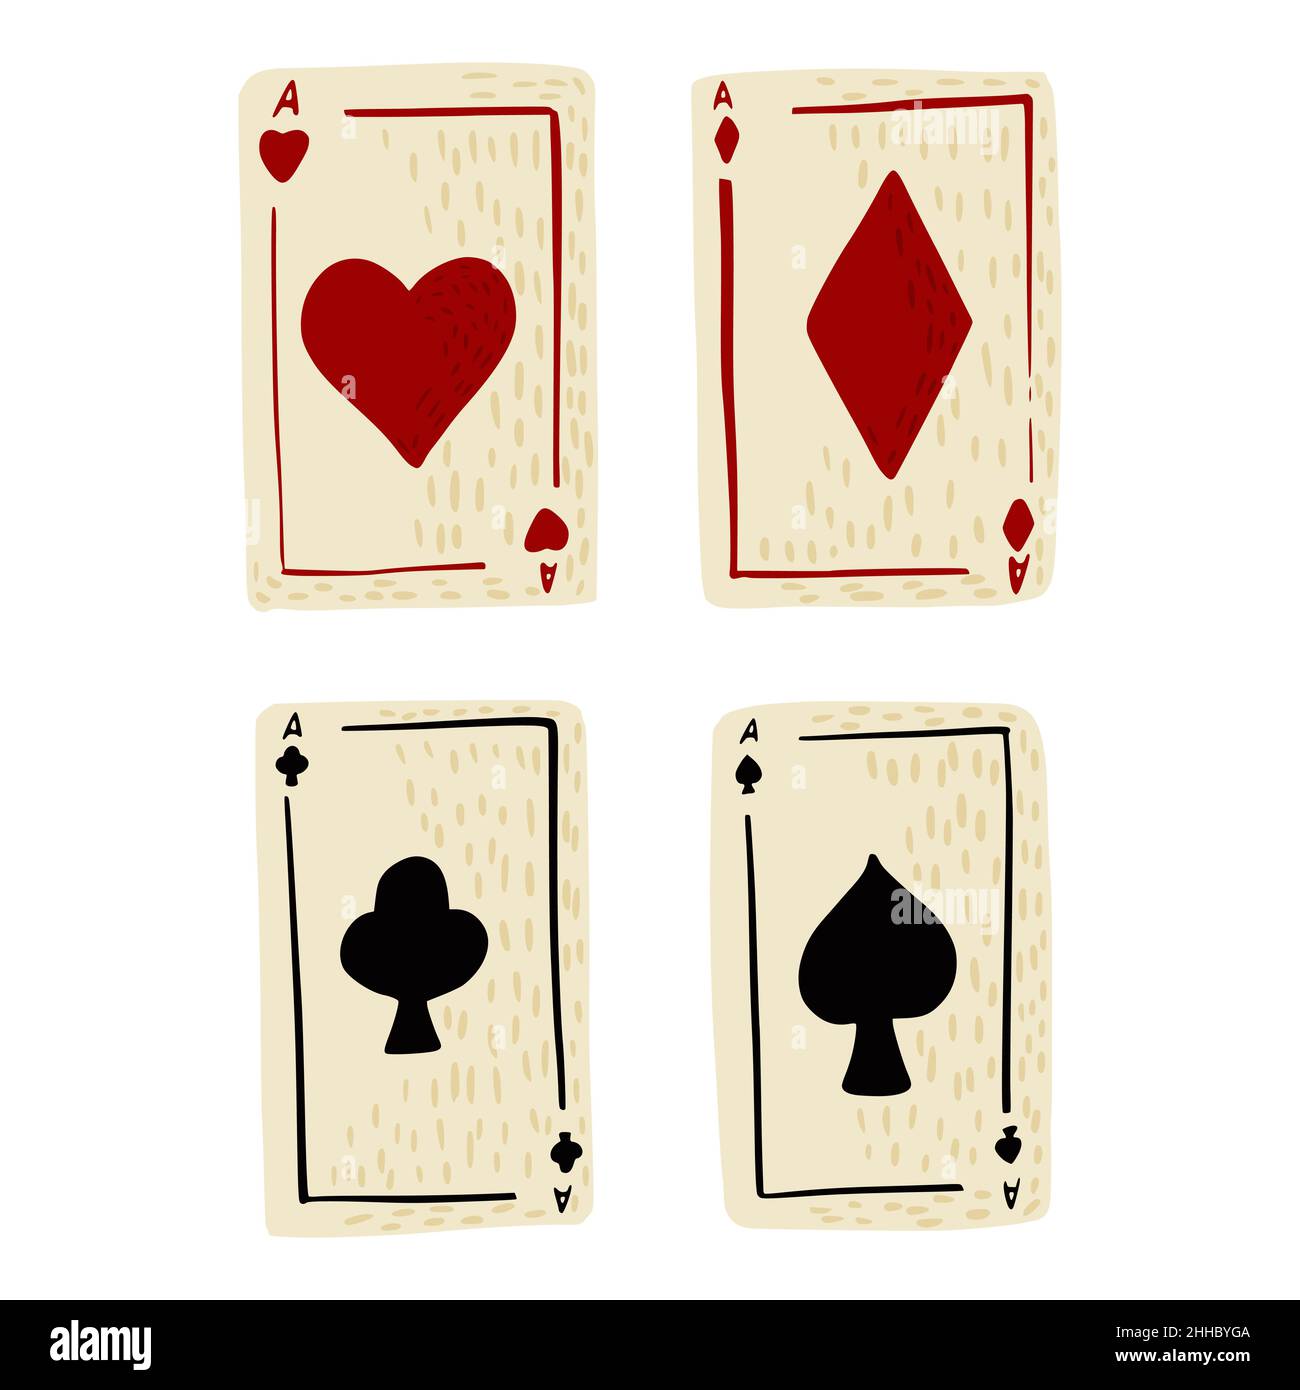 Set play cards isolated on white background. Vintage abstract design card hearts, diamonds, clubs and spades in color red and black. Doodle vector ill Stock Vector